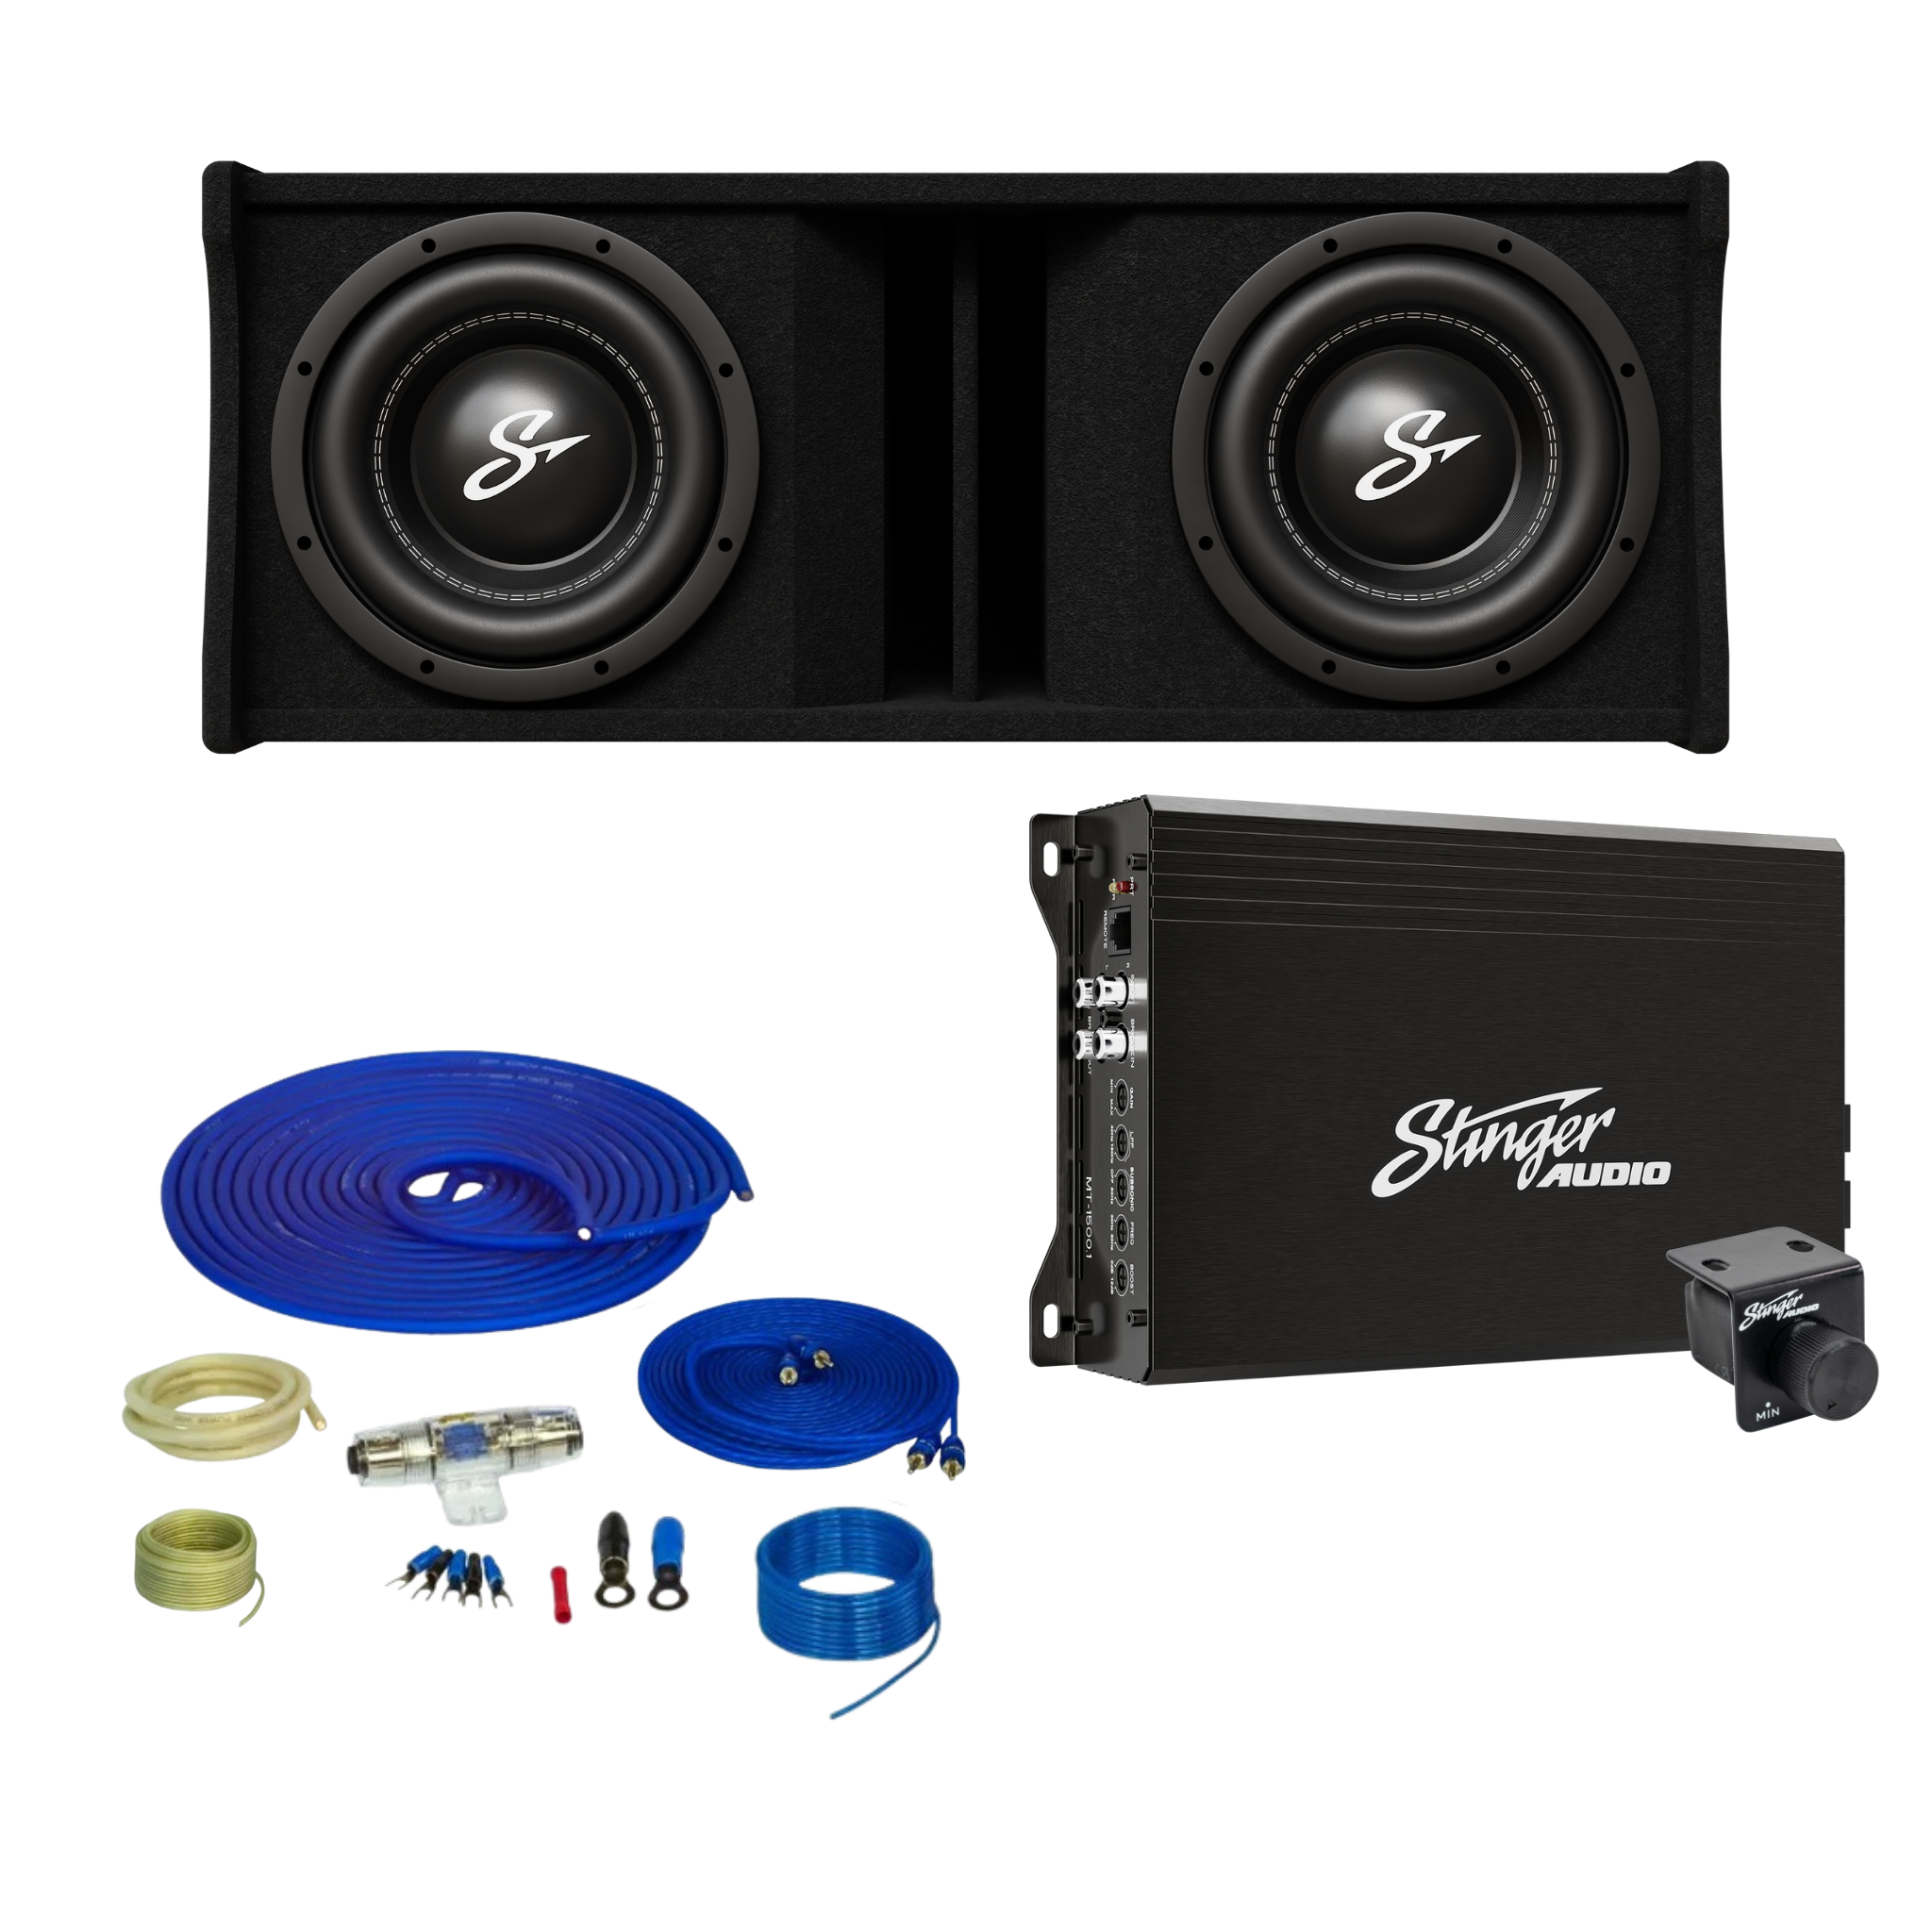 Stinger Off-Road Dual 10" 1,400 Watt (RMS) Loaded Ported Subwoofer Enclosure (1,400 Watts RMS/2,400 Watts Max) Bass Package with Amplifier & Complete Wiring Kit